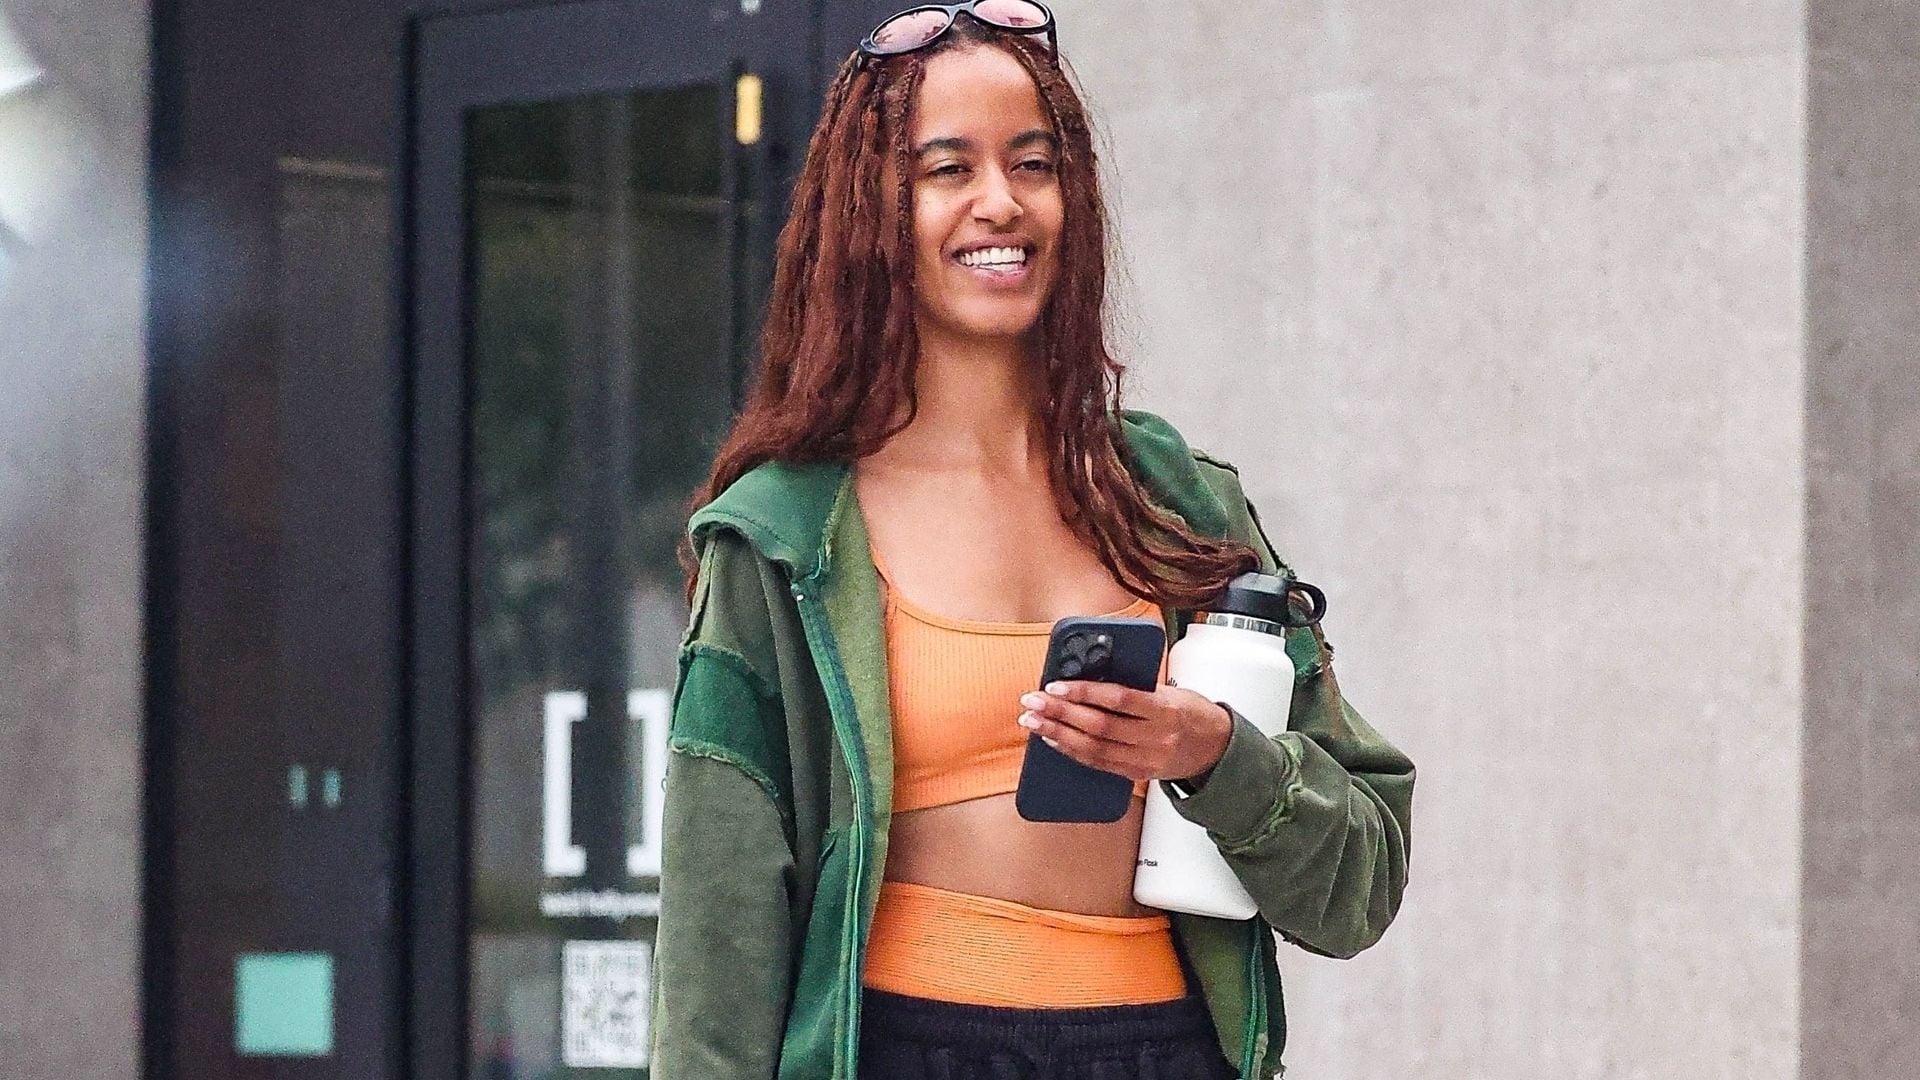 Malia Obama was spotted radiant and refreshed after a gym workout